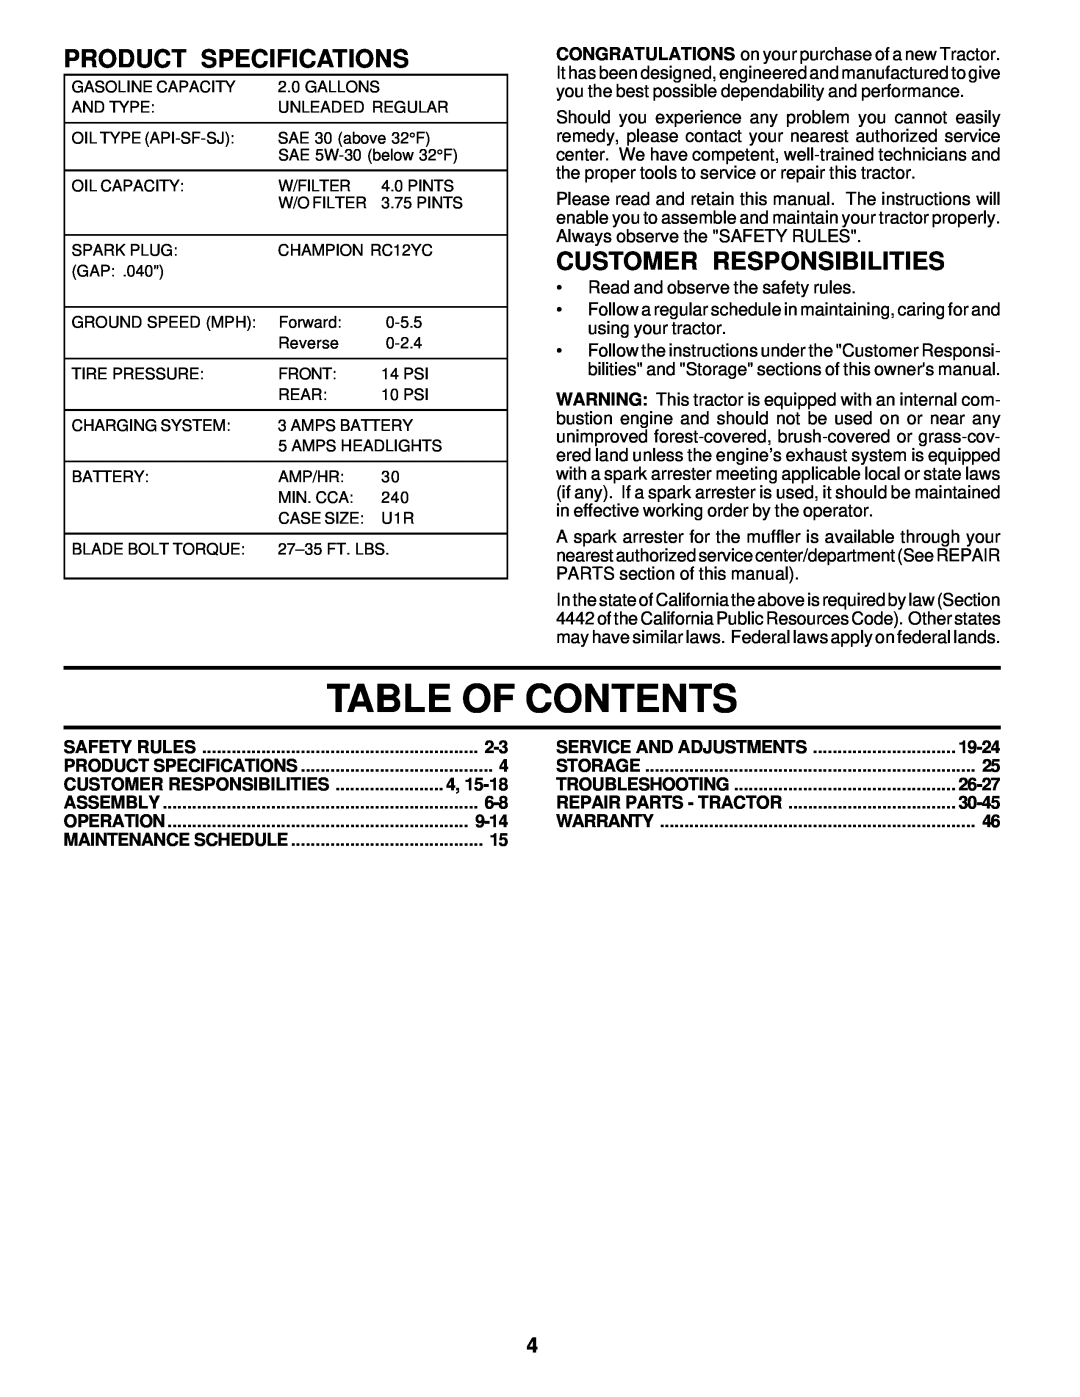 Poulan 177552 owner manual Table Of Contents, Product Specifications, Customer Responsibilities 